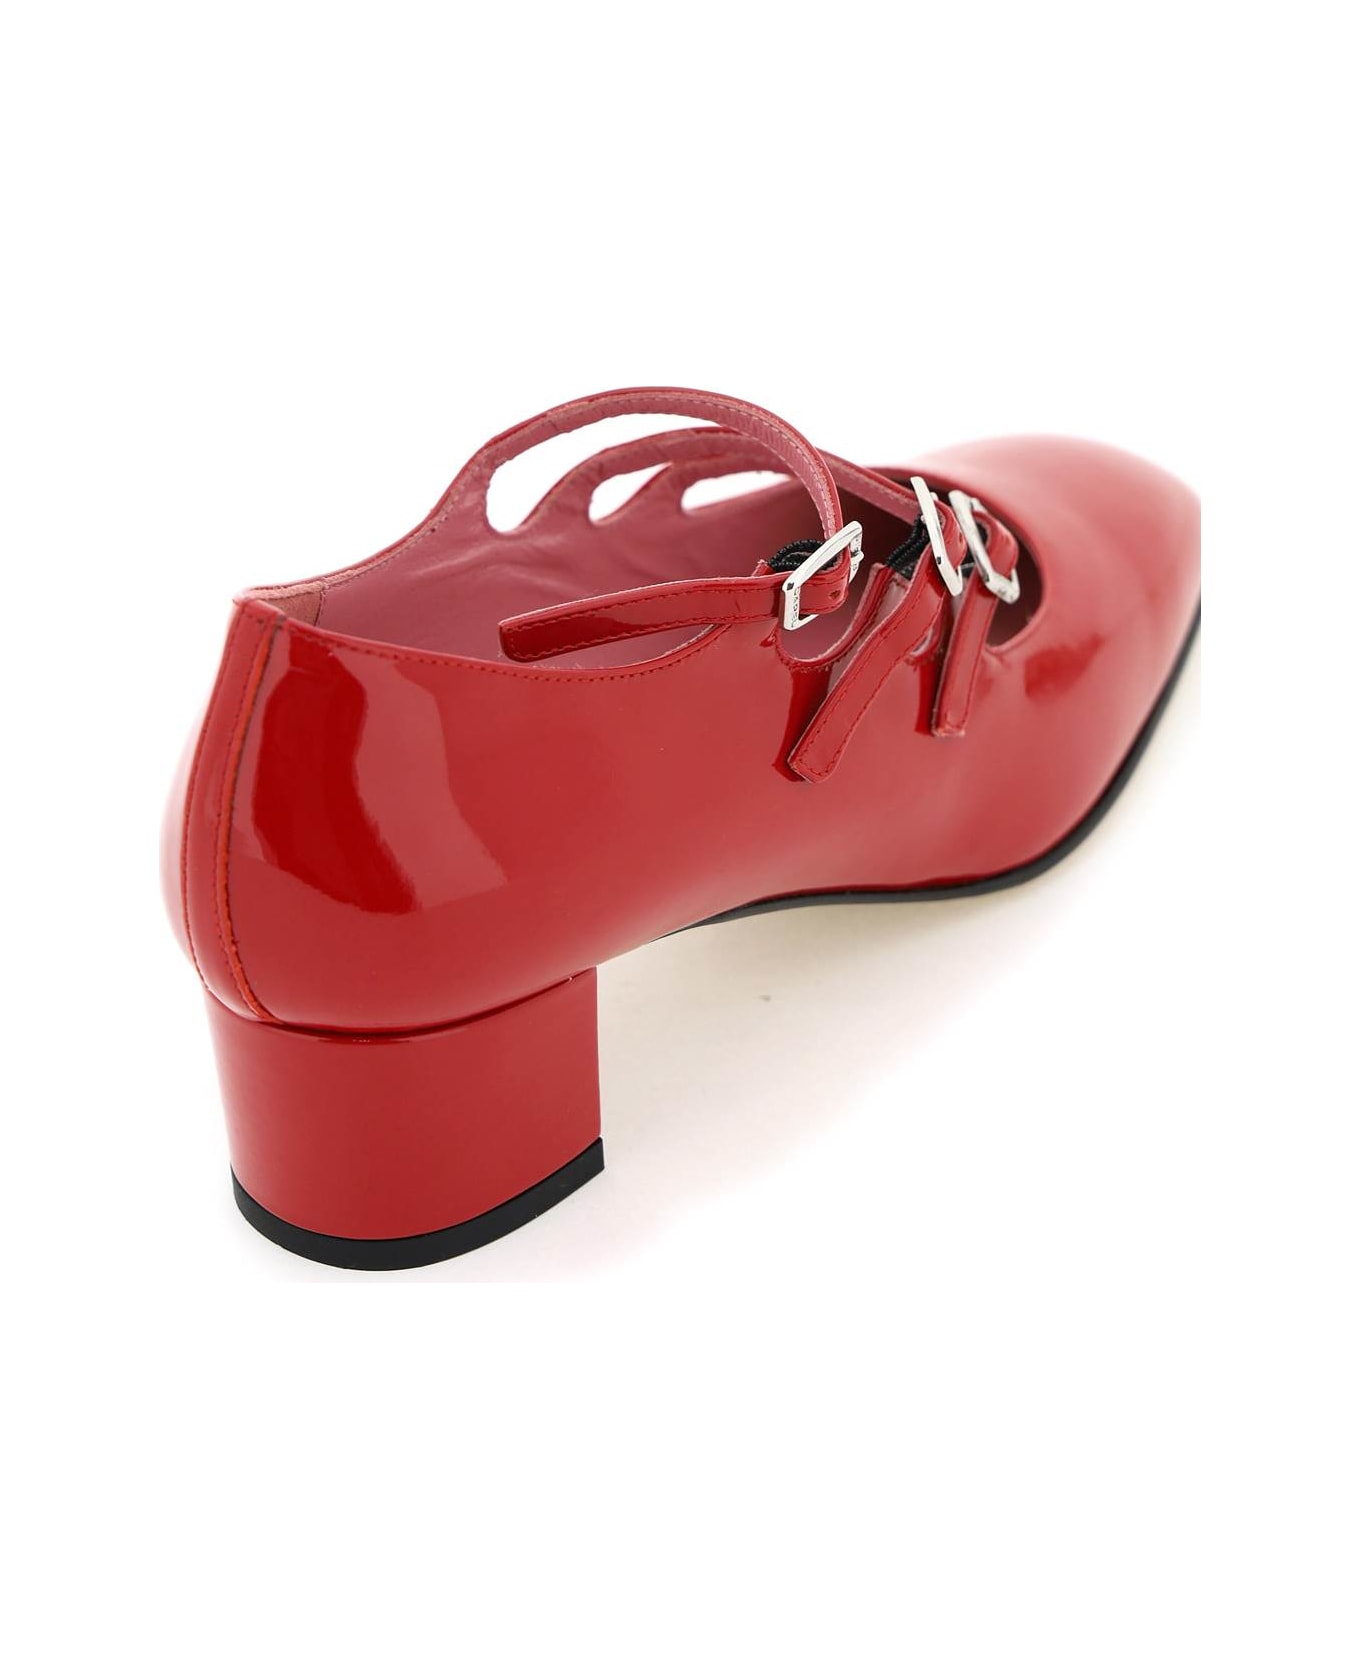 Carel Patent Leather Kina Mary Jane - RED ハイヒール